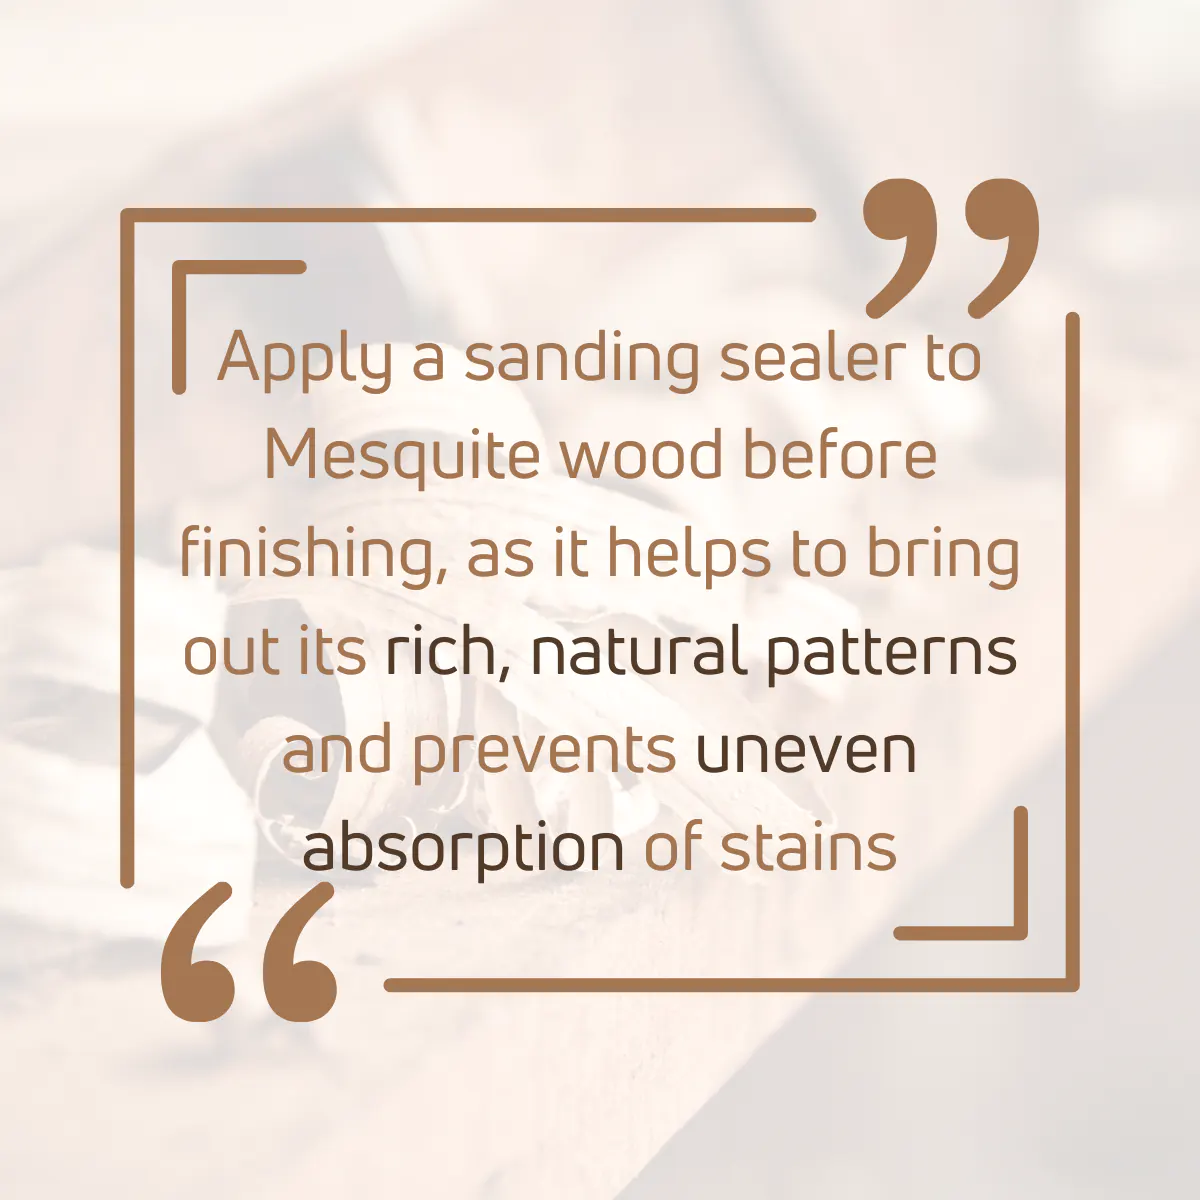 Tip for working with Mesquite wood